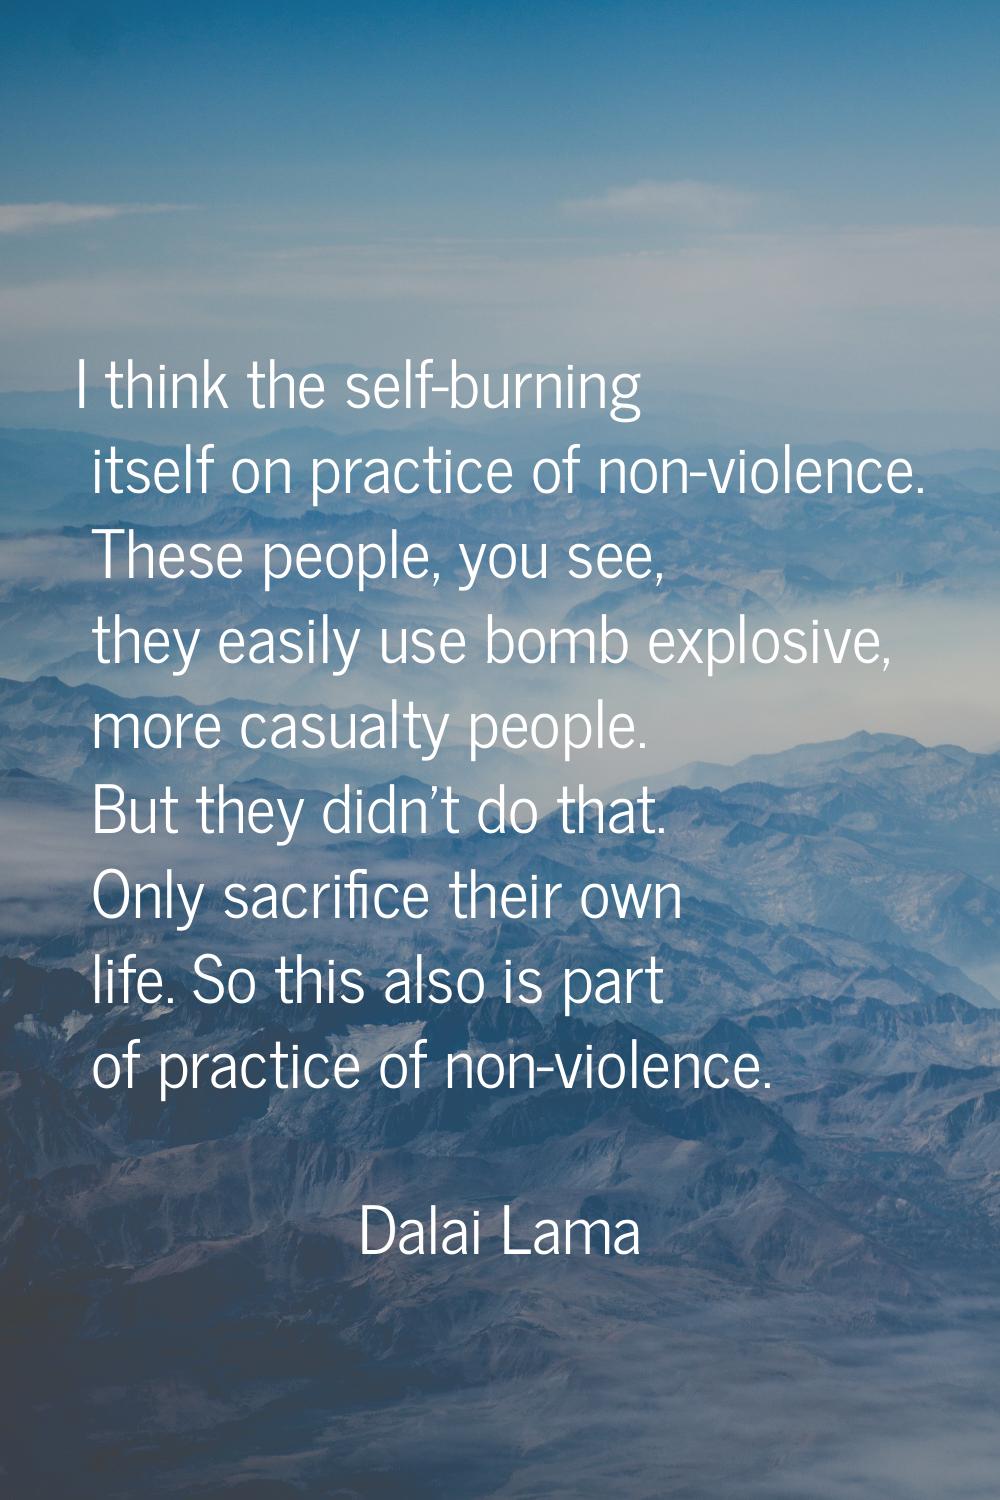 I think the self-burning itself on practice of non-violence. These people, you see, they easily use